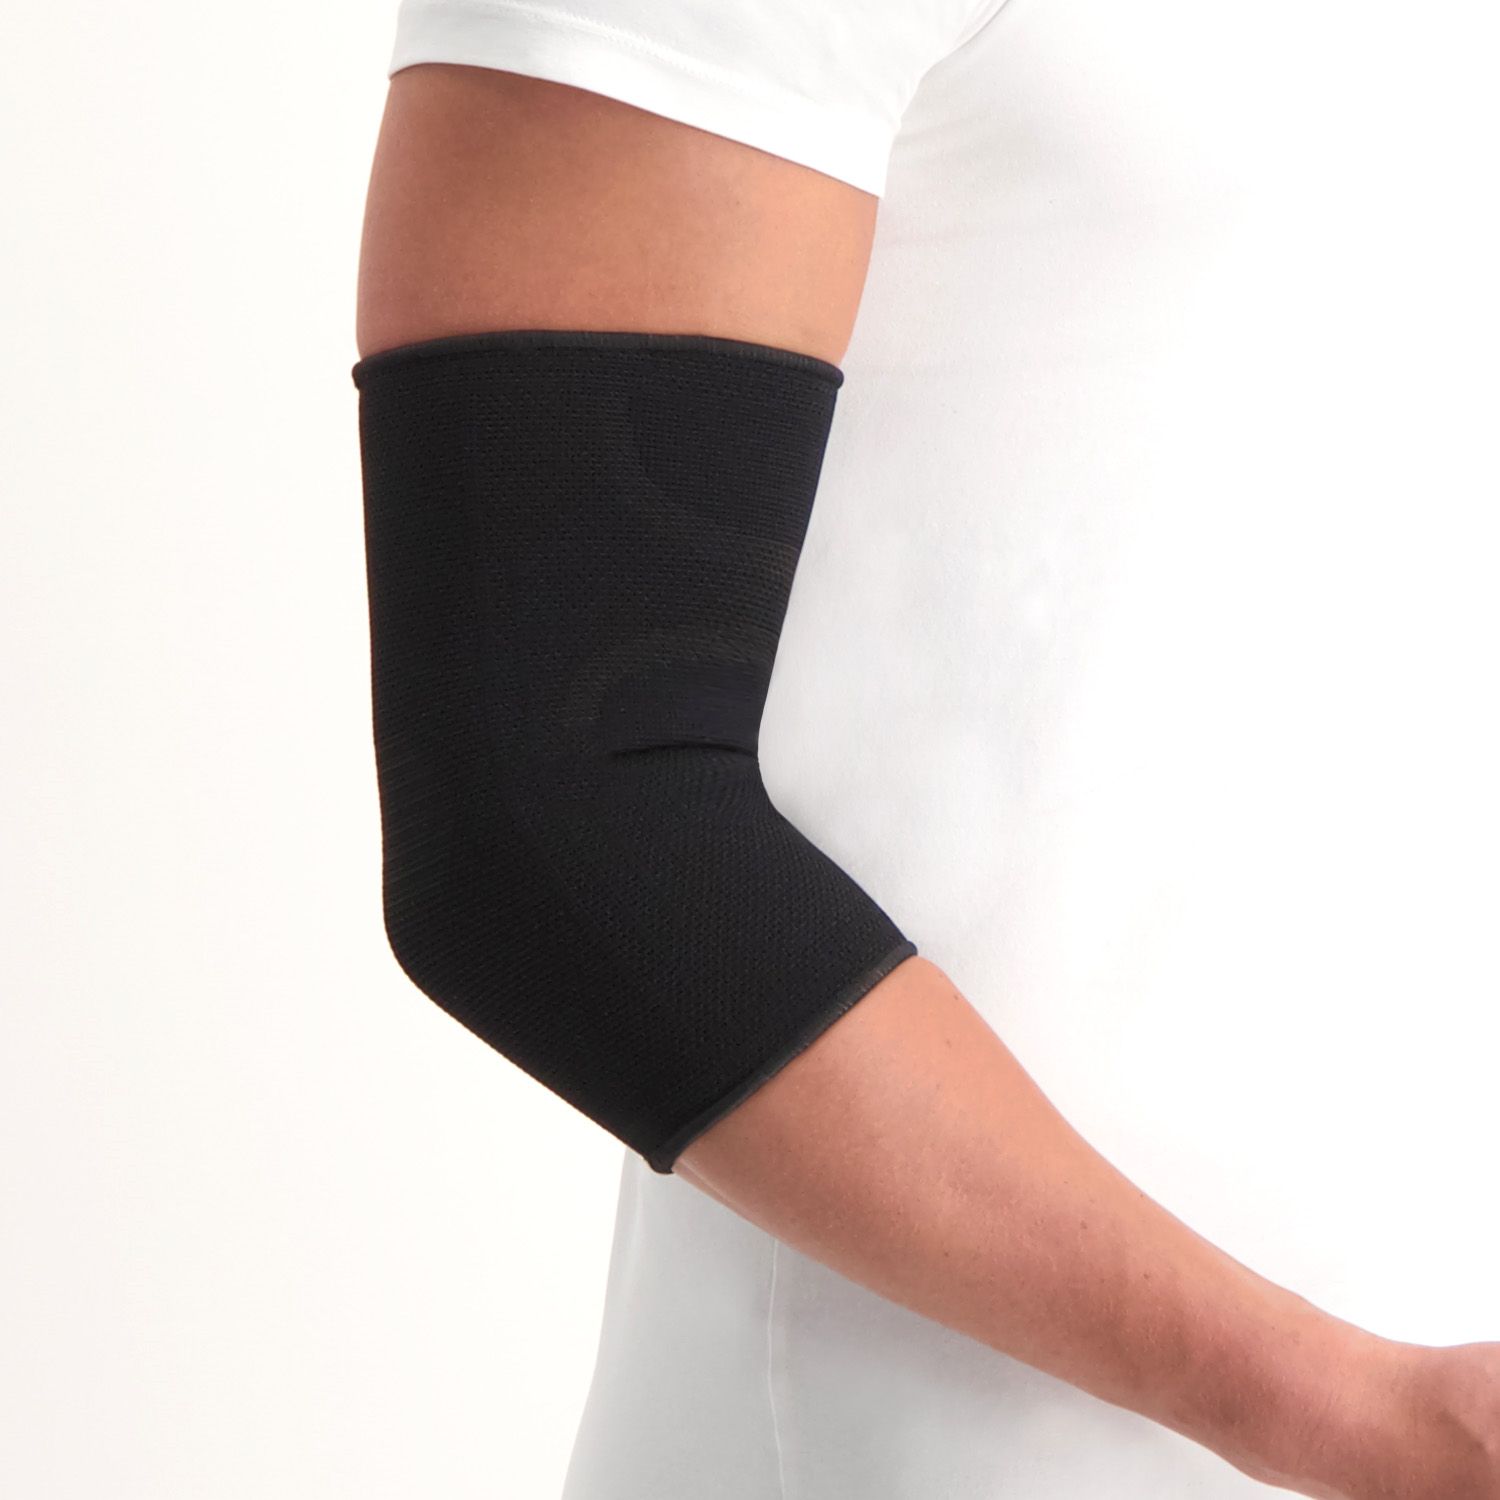 dunimed elbow support around arm